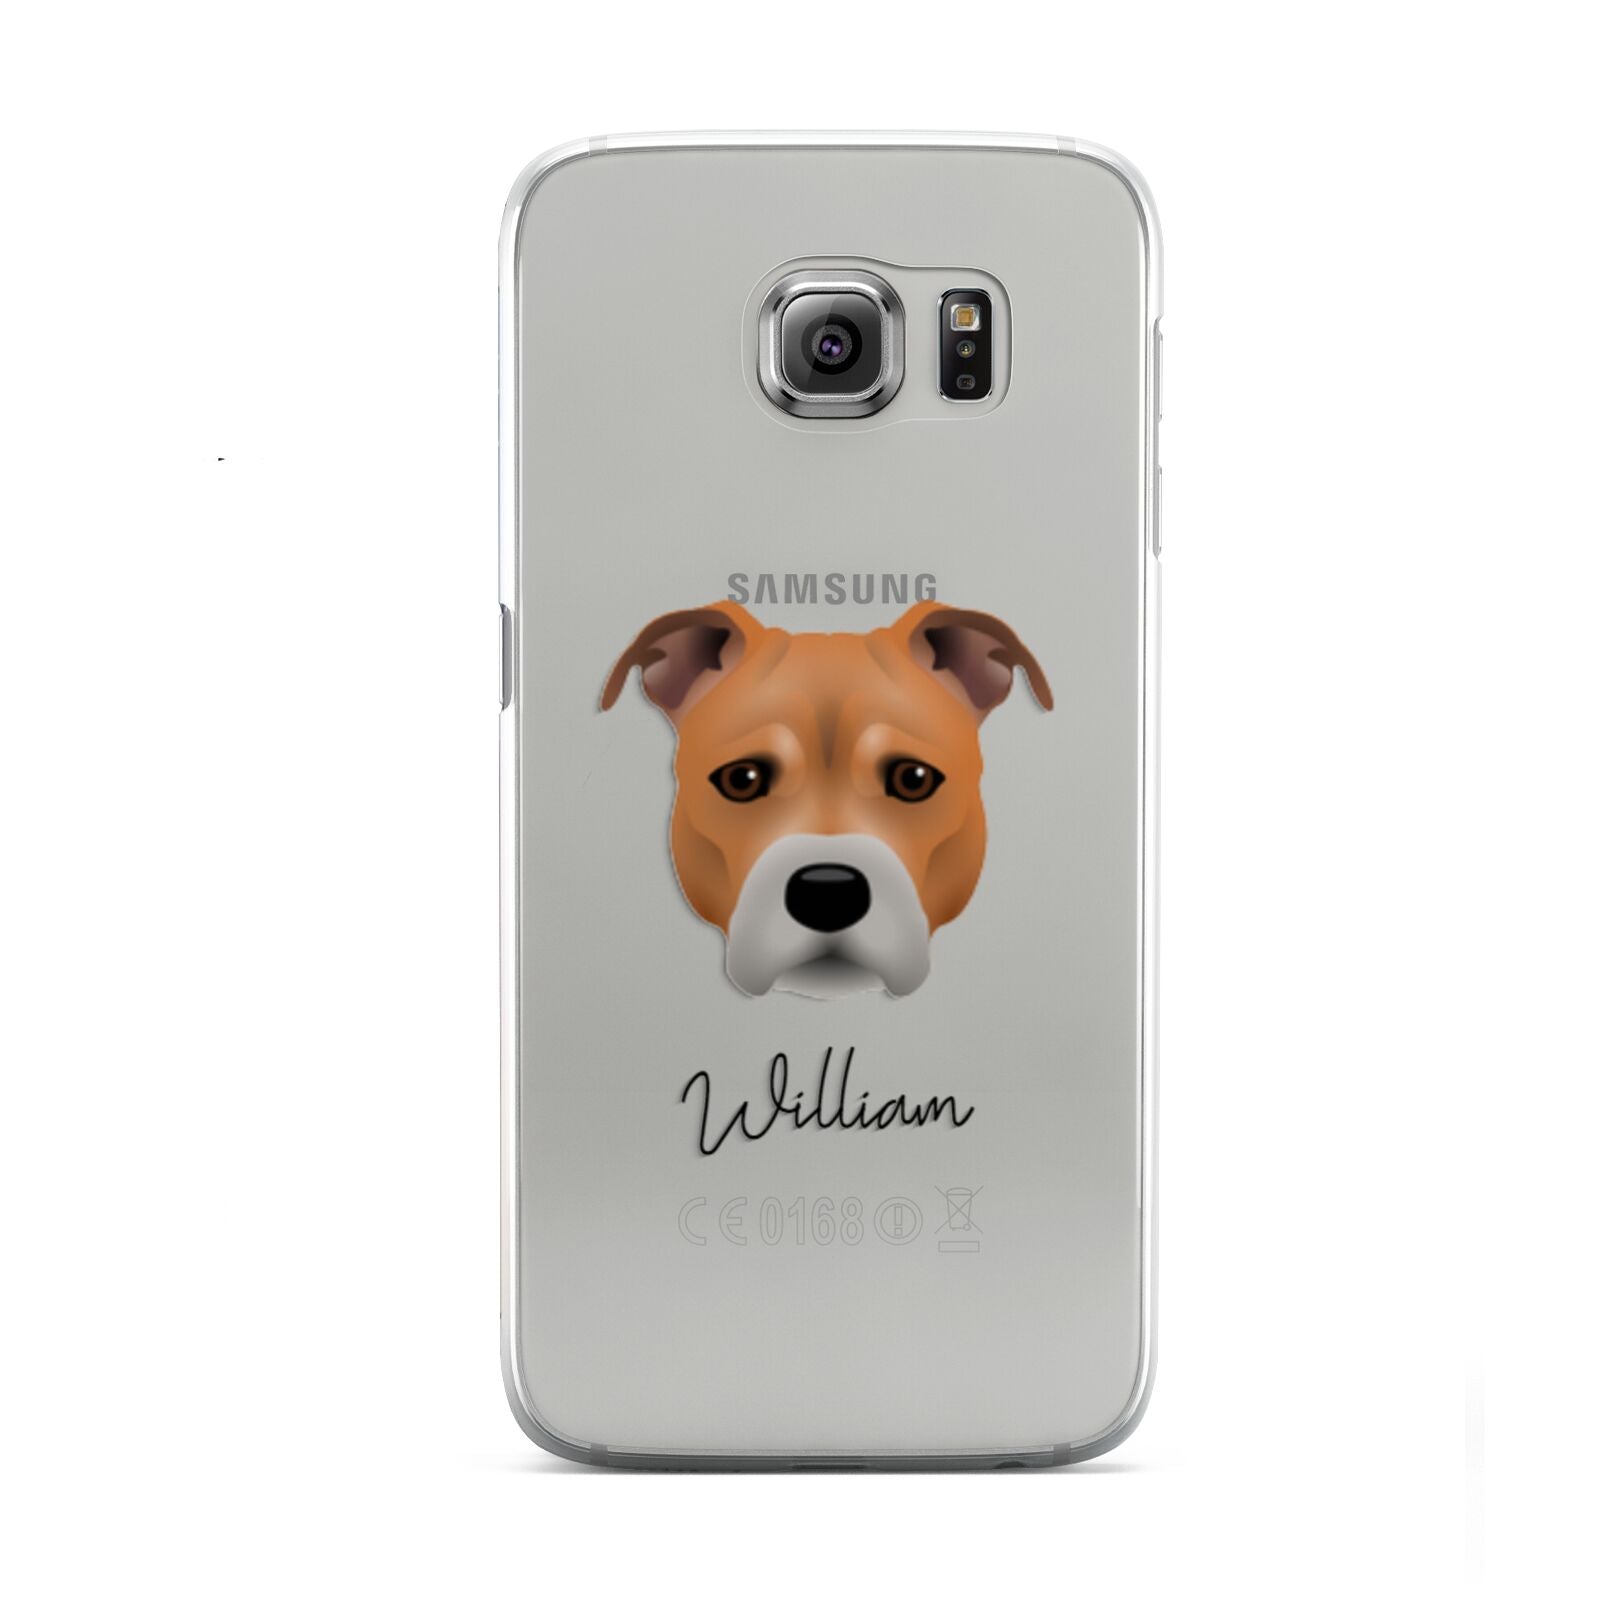 Staffordshire Bull Terrier Personalised Samsung Galaxy S6 Case